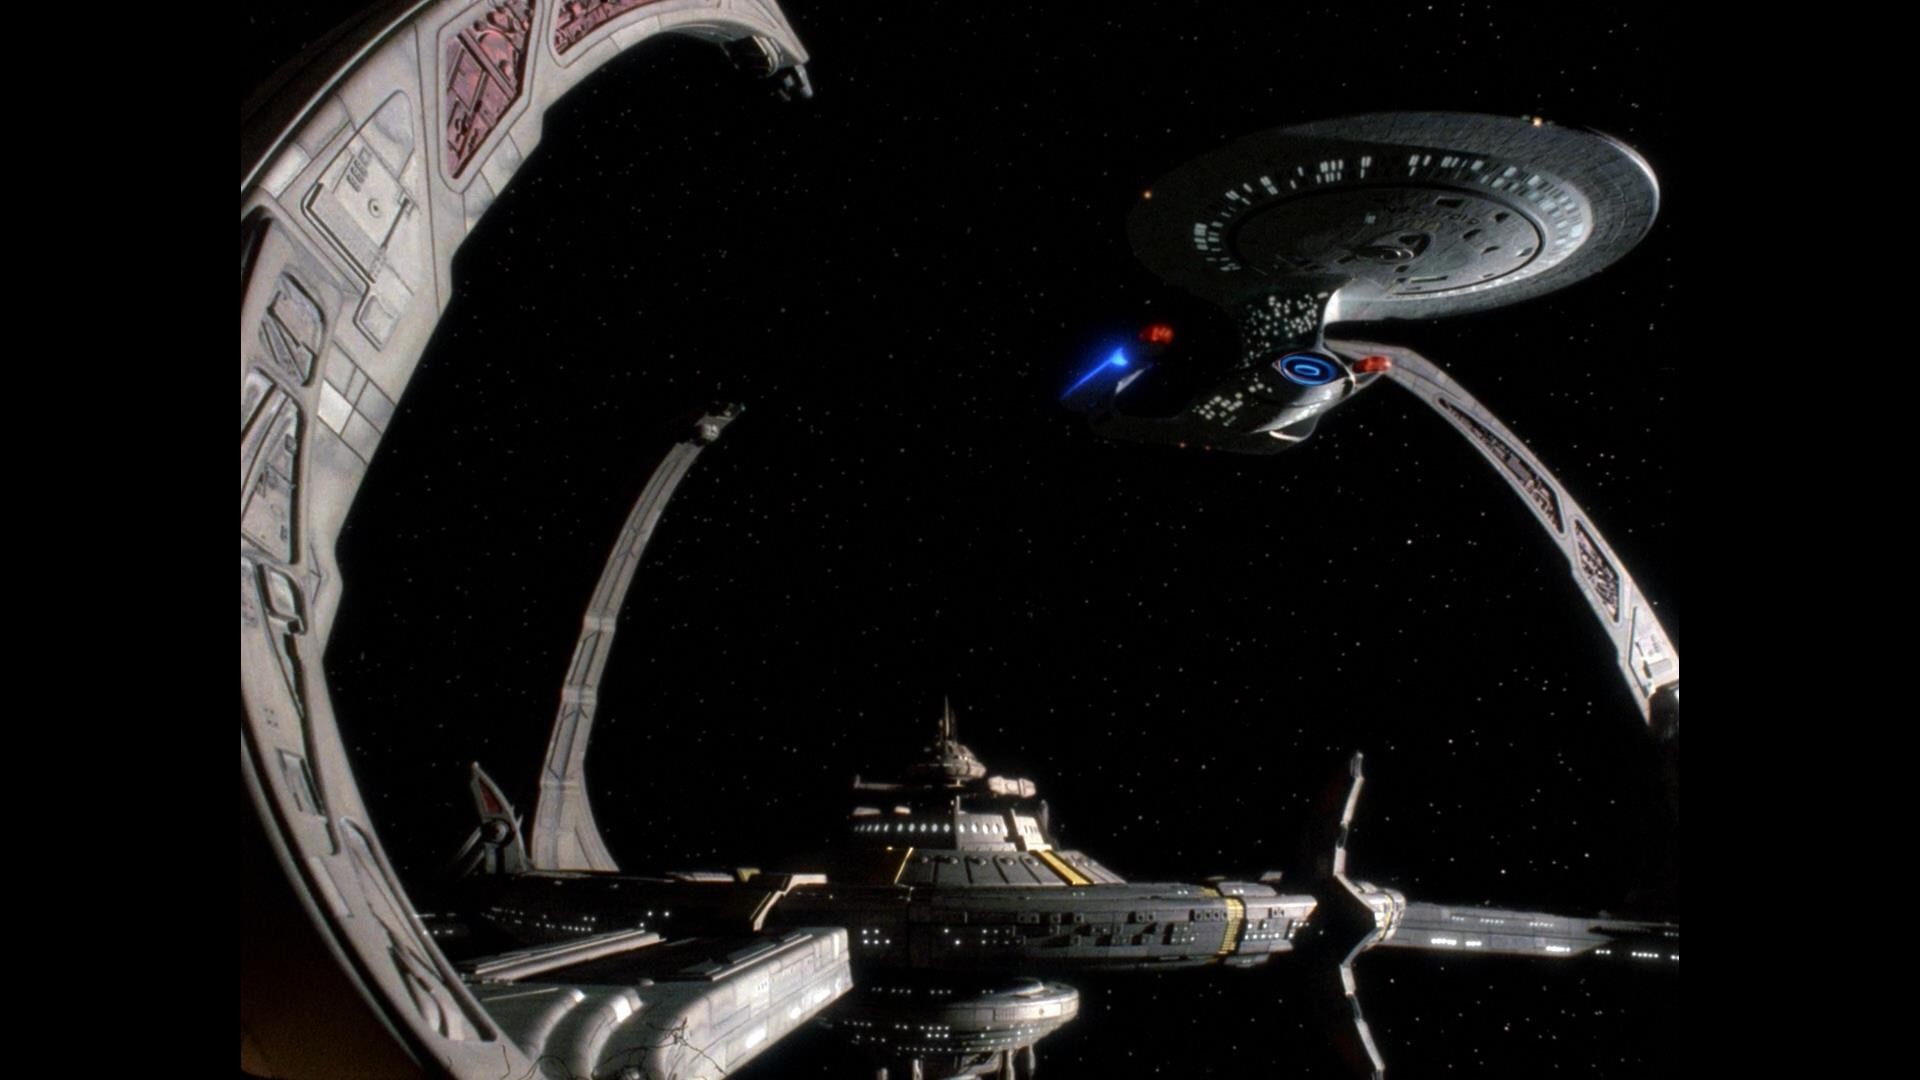 1920x1080 birthright_ds9_01_small. birthright_ds9_02_small